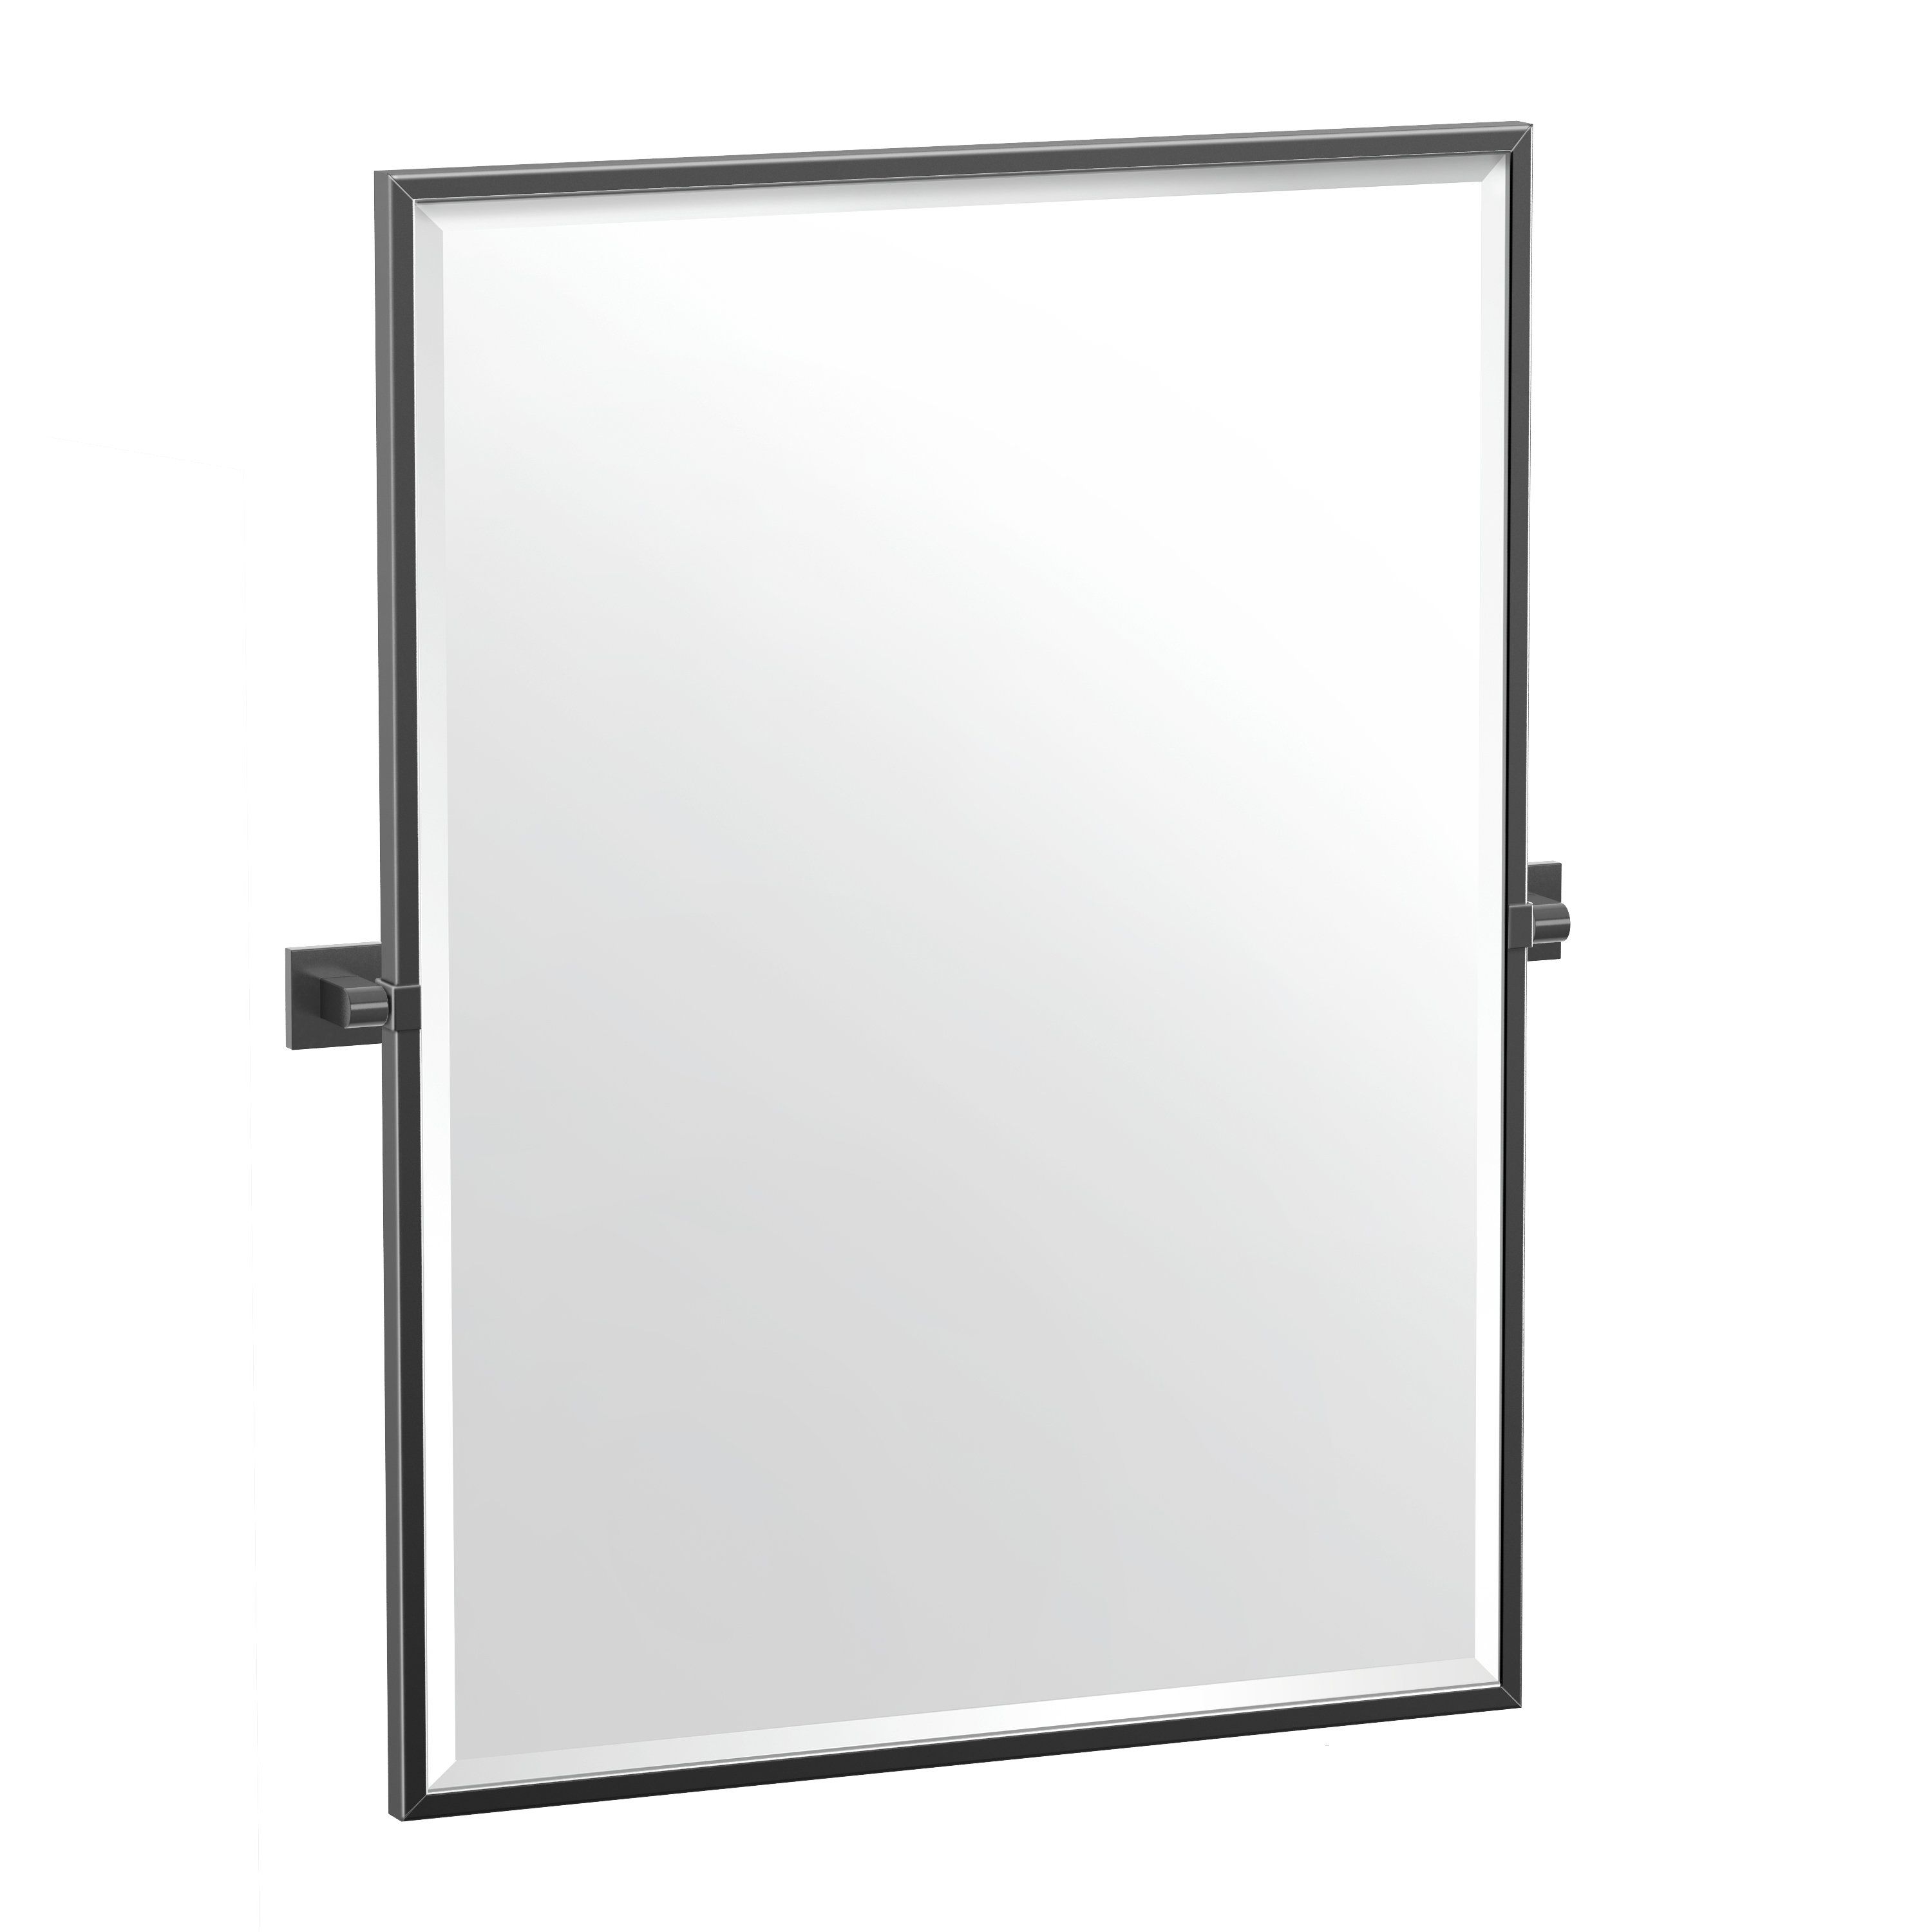 2019 Elevate Wall Mirror Within Elevate Wall Mirrors (View 1 of 20)